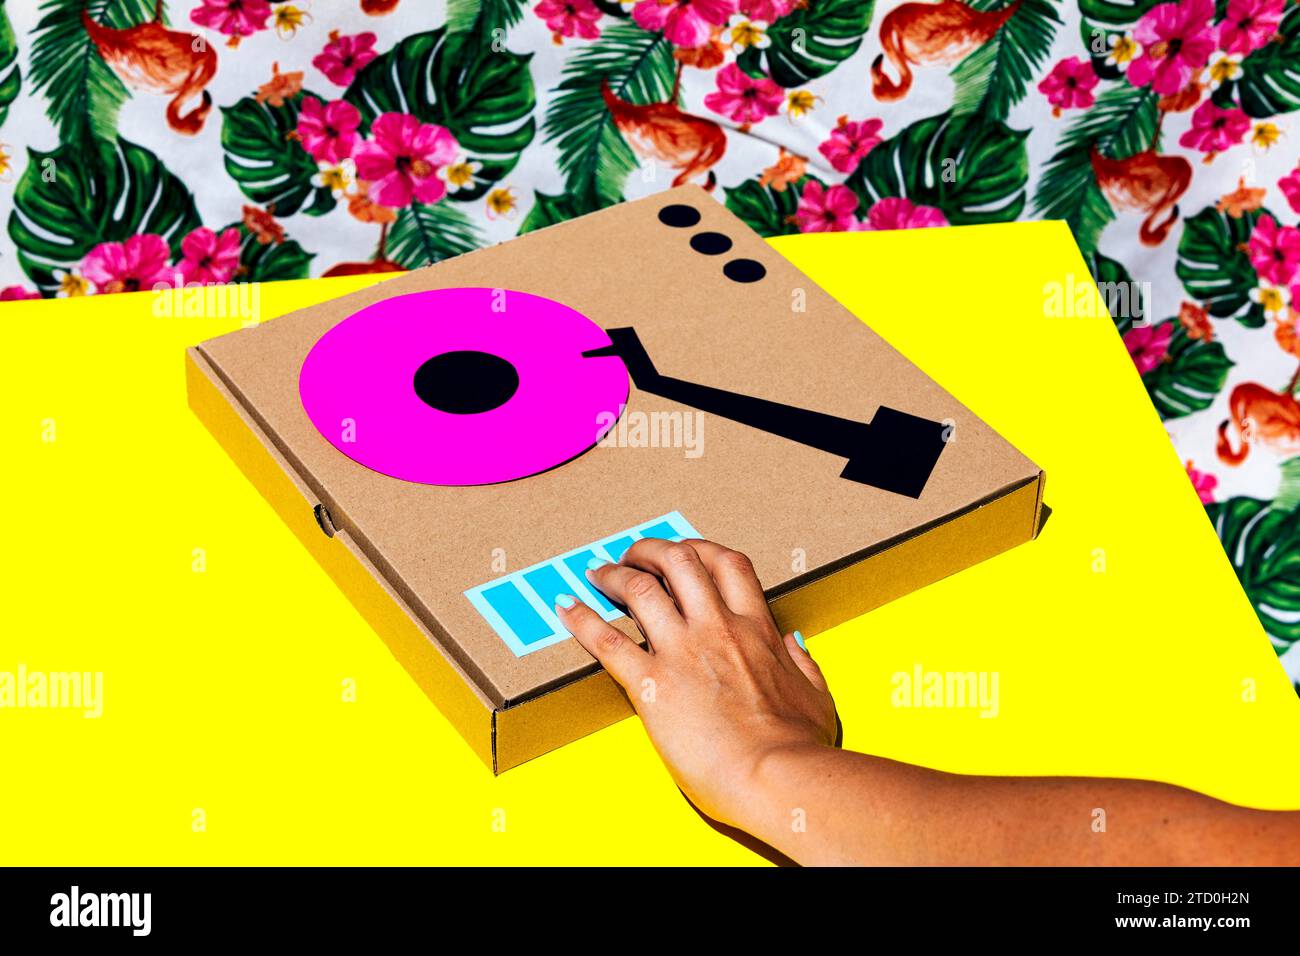 Crop hand of anonymous woman playing antique turntable made with cardboard box on yellow table over floral background Stock Photo